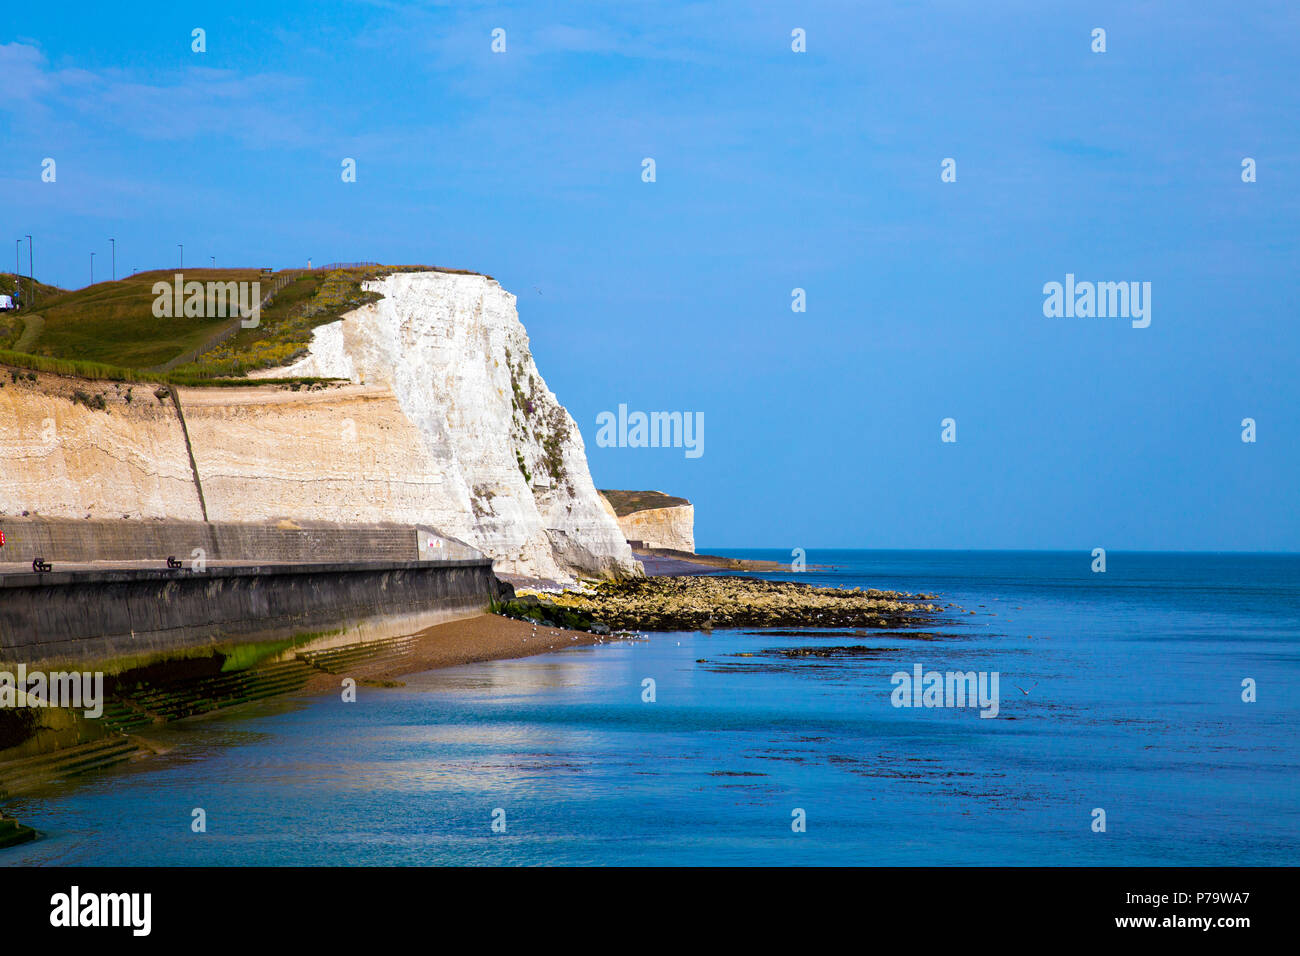 Sea and white cliffs on the coast in town of Saltdean, East Sussex, UK Stock Photo